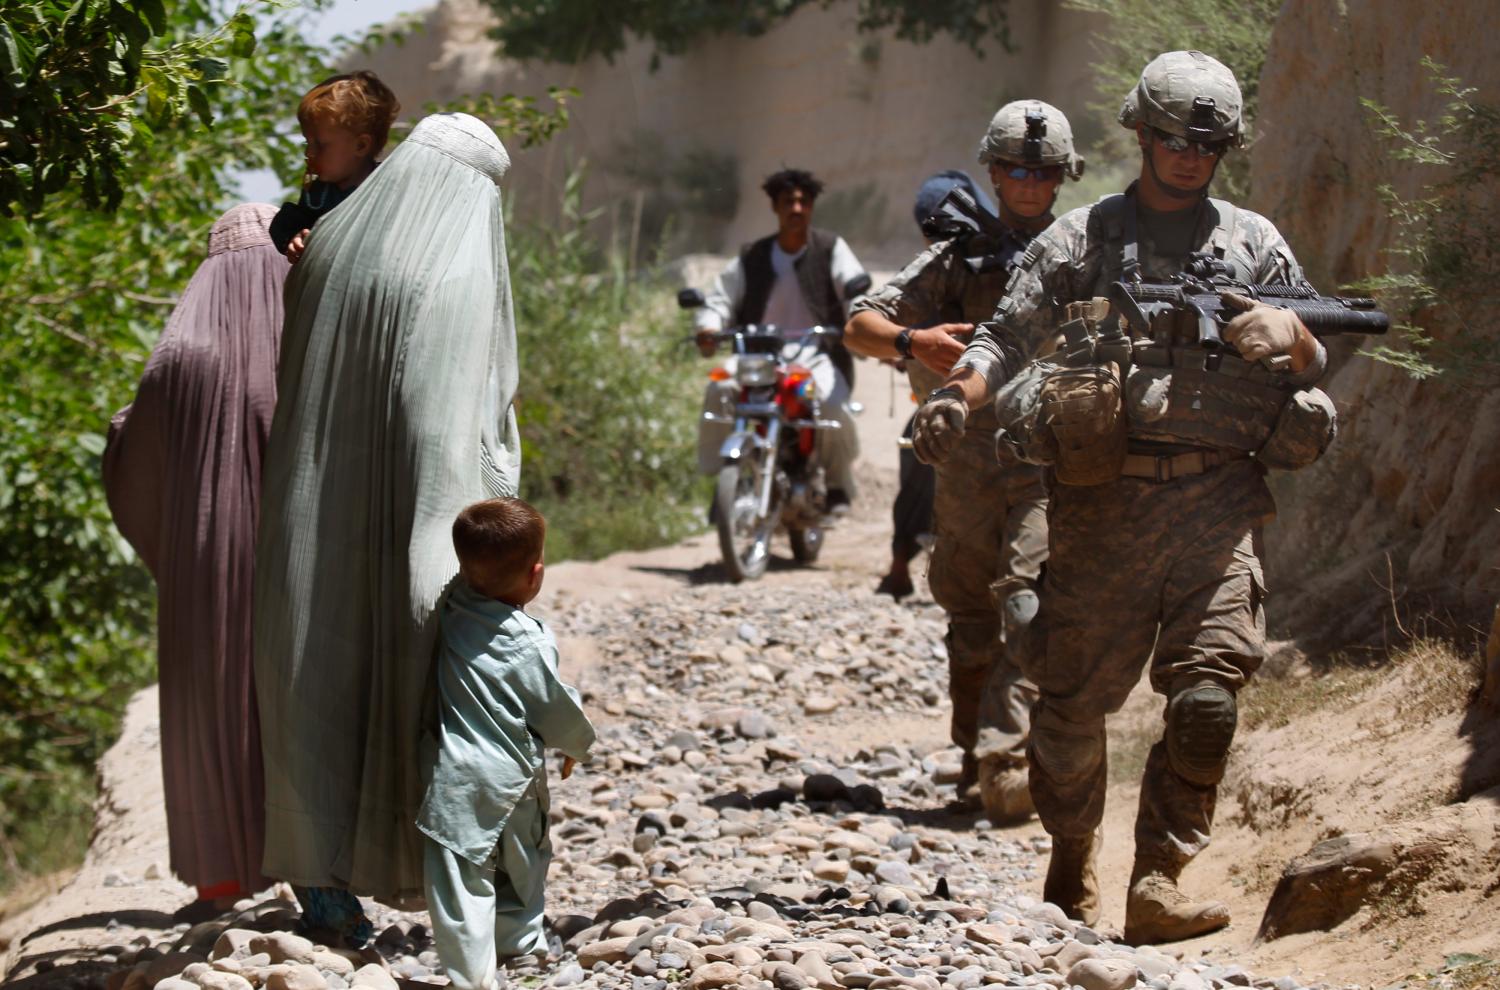 U.S. Army soldiers with the 1st platoon, 2nd Battalion, 508th Parachute Infantry Regiment, part of the 82nd Airborne Division, patrol in Mainjui as local women walk by in Arghandab valley in Kandahar province, southern Afghanistan, May 9, 2010. U.S. forces are massing on the outskirts of Kandahar for the biggest military offensive of the nearly nine-year-old war, in the hope of turning the tide against a strengthening Taliban insurgency. REUTERS/Yannis Behrakis (AFGHANISTAN - Tags: MILITARY CONFLICT CIVIL UNREST)